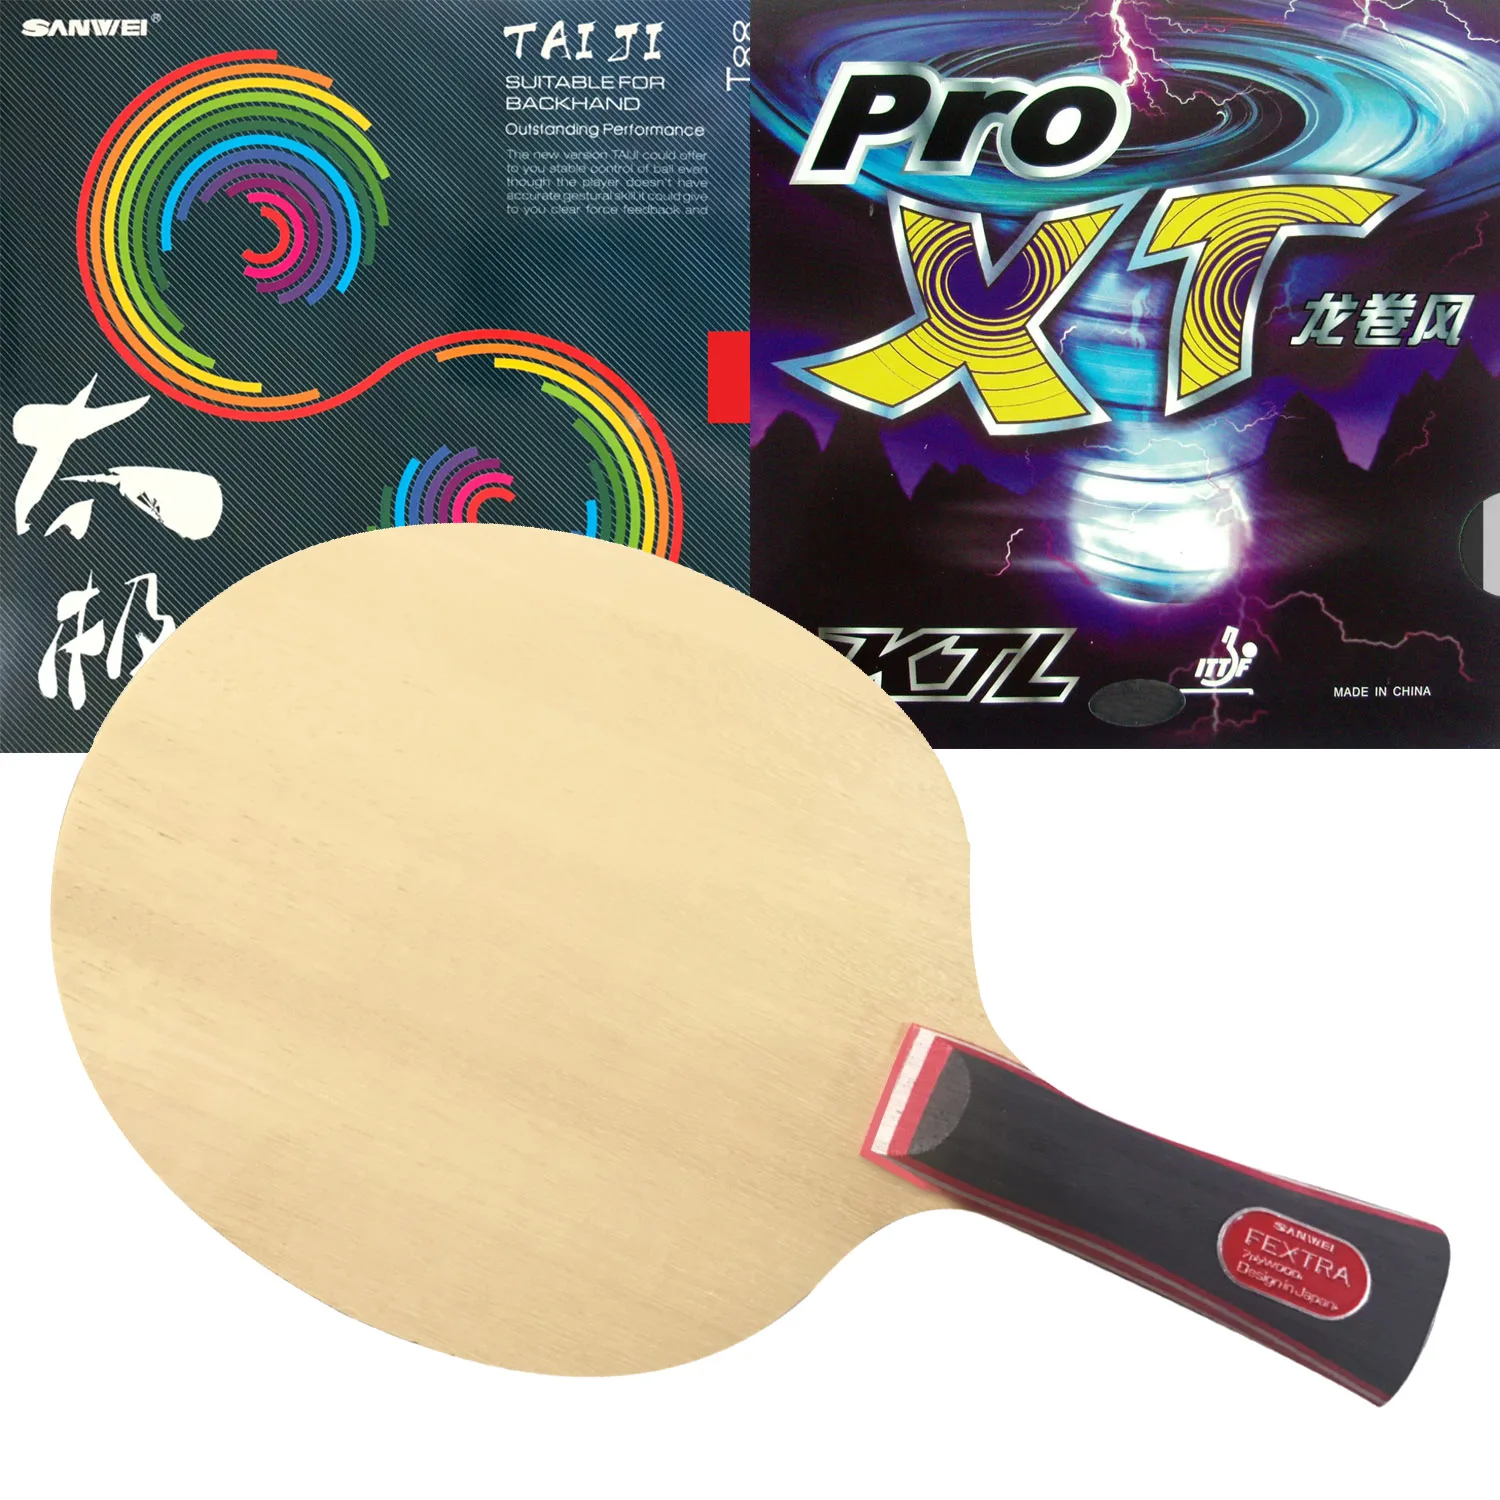 

Pro Combo Racket Sanwei FEXTRA 7 table tennis blade with KTL Pro XT and SANWEI TAIJI Super light pips in table tennis Rubber